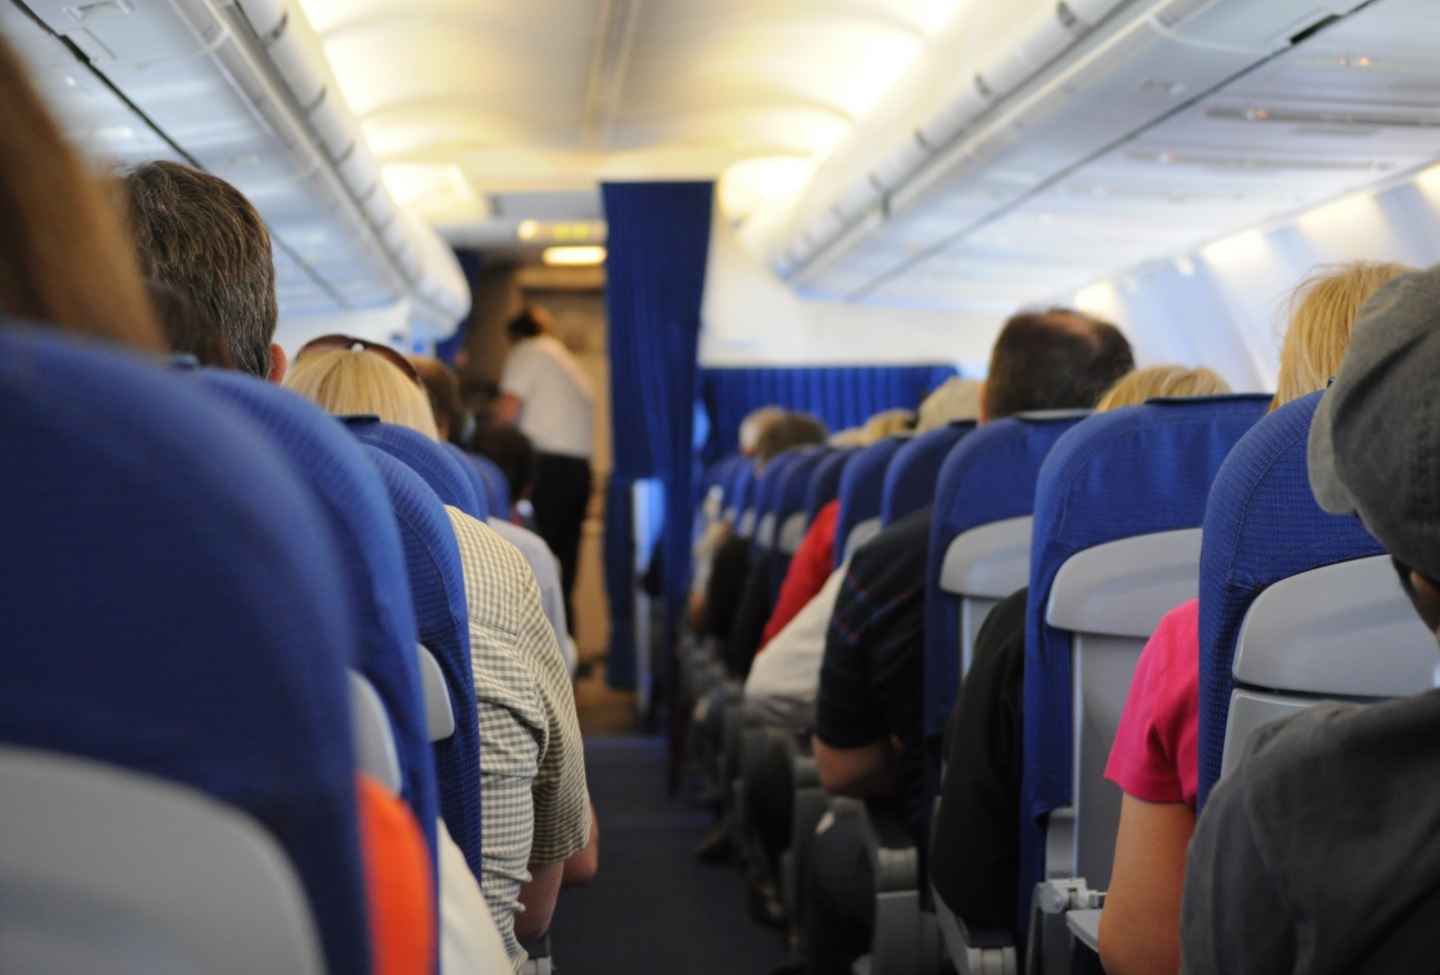 A man is found dead in the plane's bathroom and the passenger accuses the crew of disdain